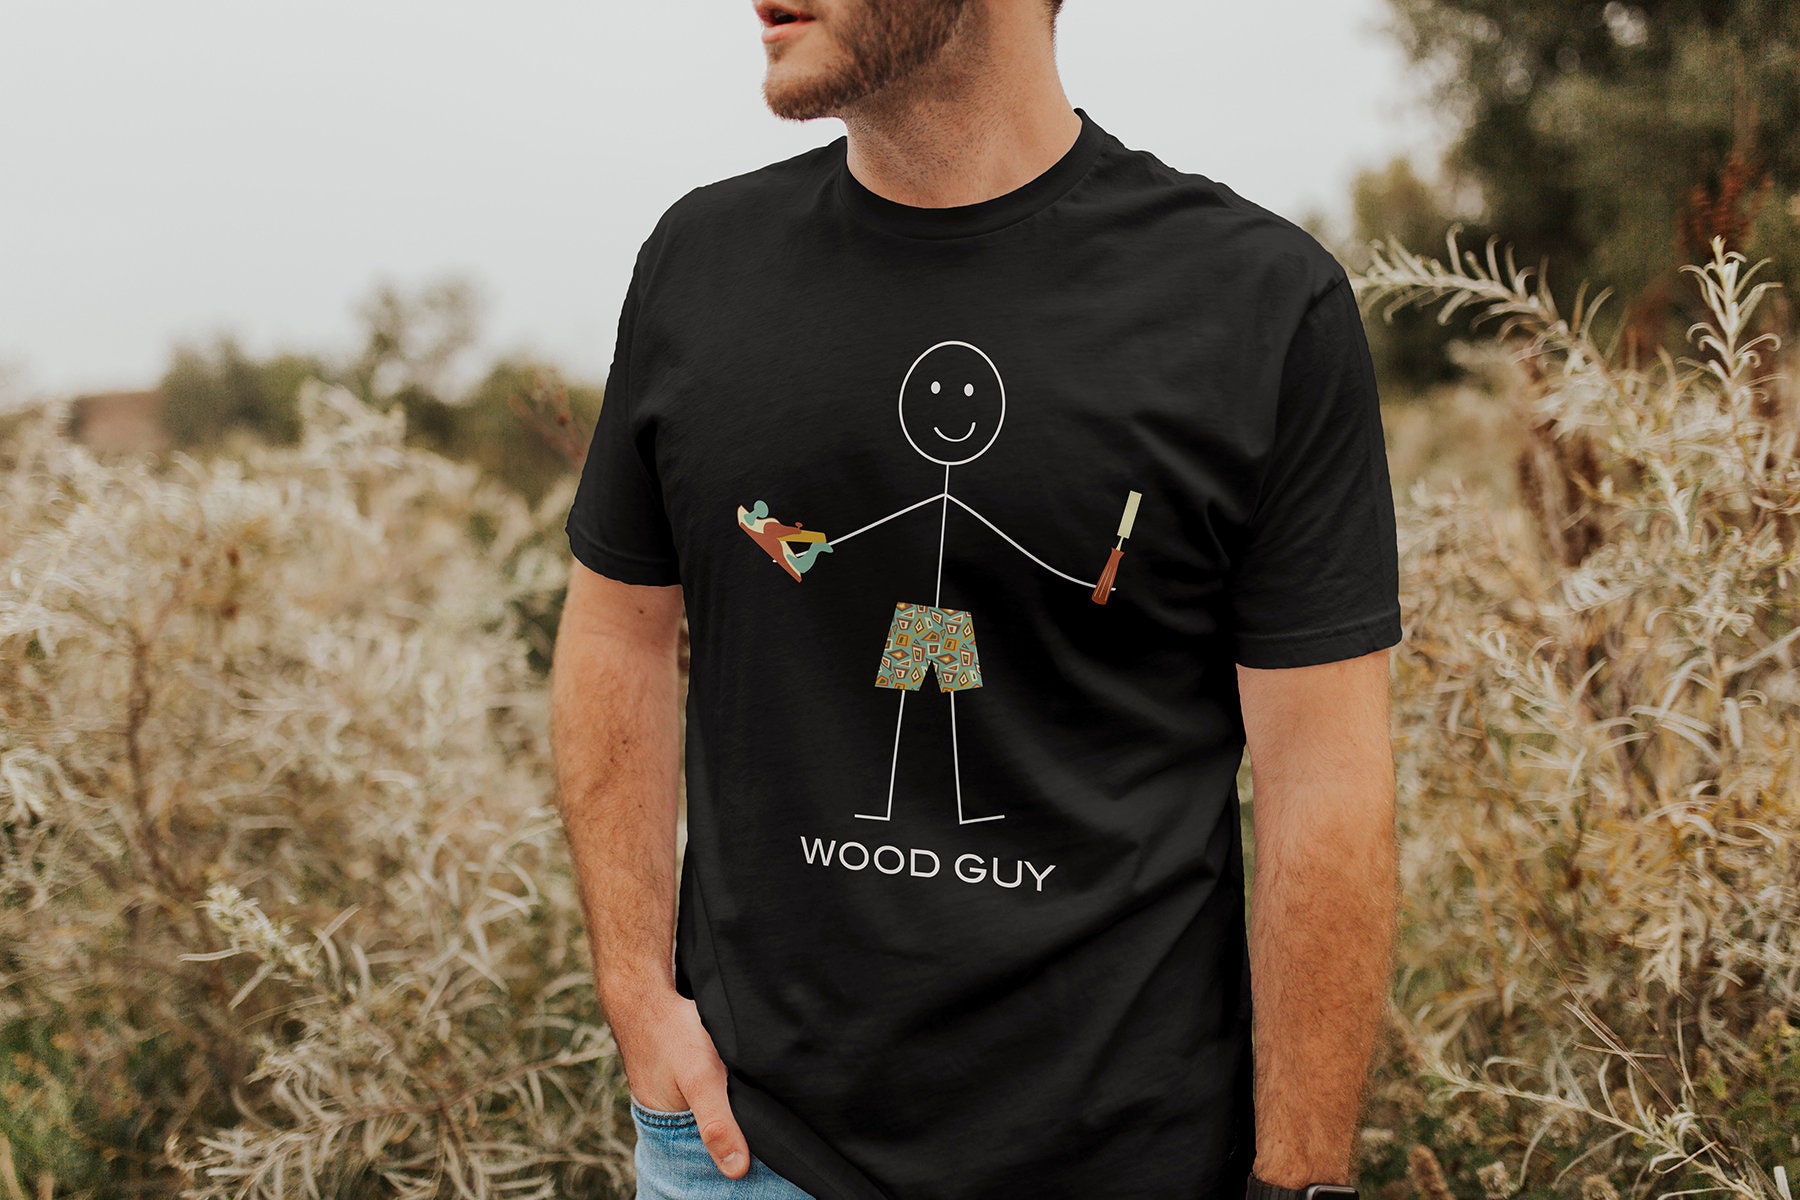 Funny Woodworking Carpentry Shirt For Carpenter Dad Gift For Do It Yourself  Dads DIY / Handyman Dad Travel Mug by Creekman